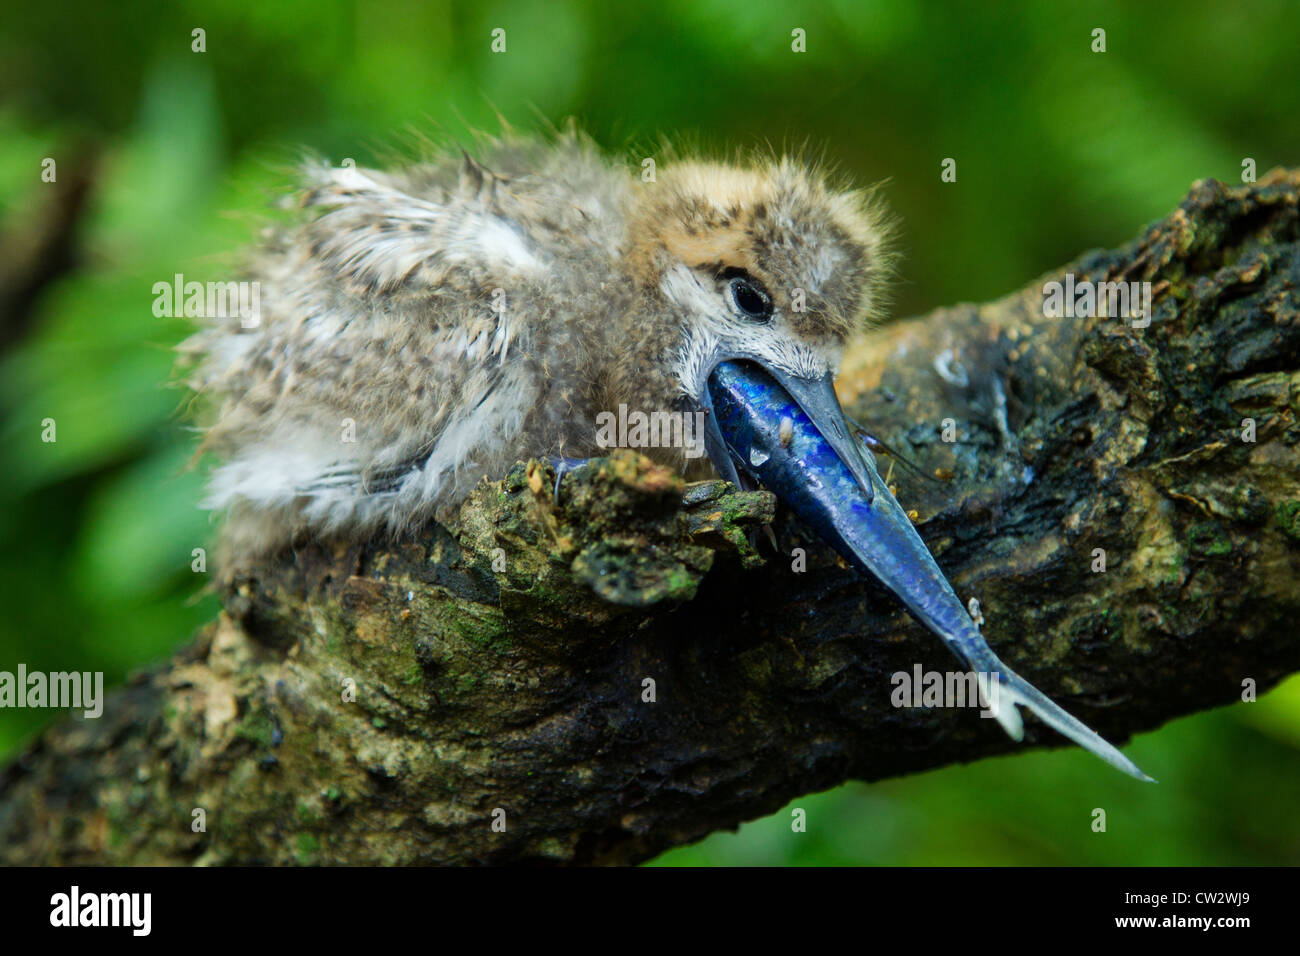 White fairy tern chick (Gygis alba) eating a fish.Seychelles Stock Photo